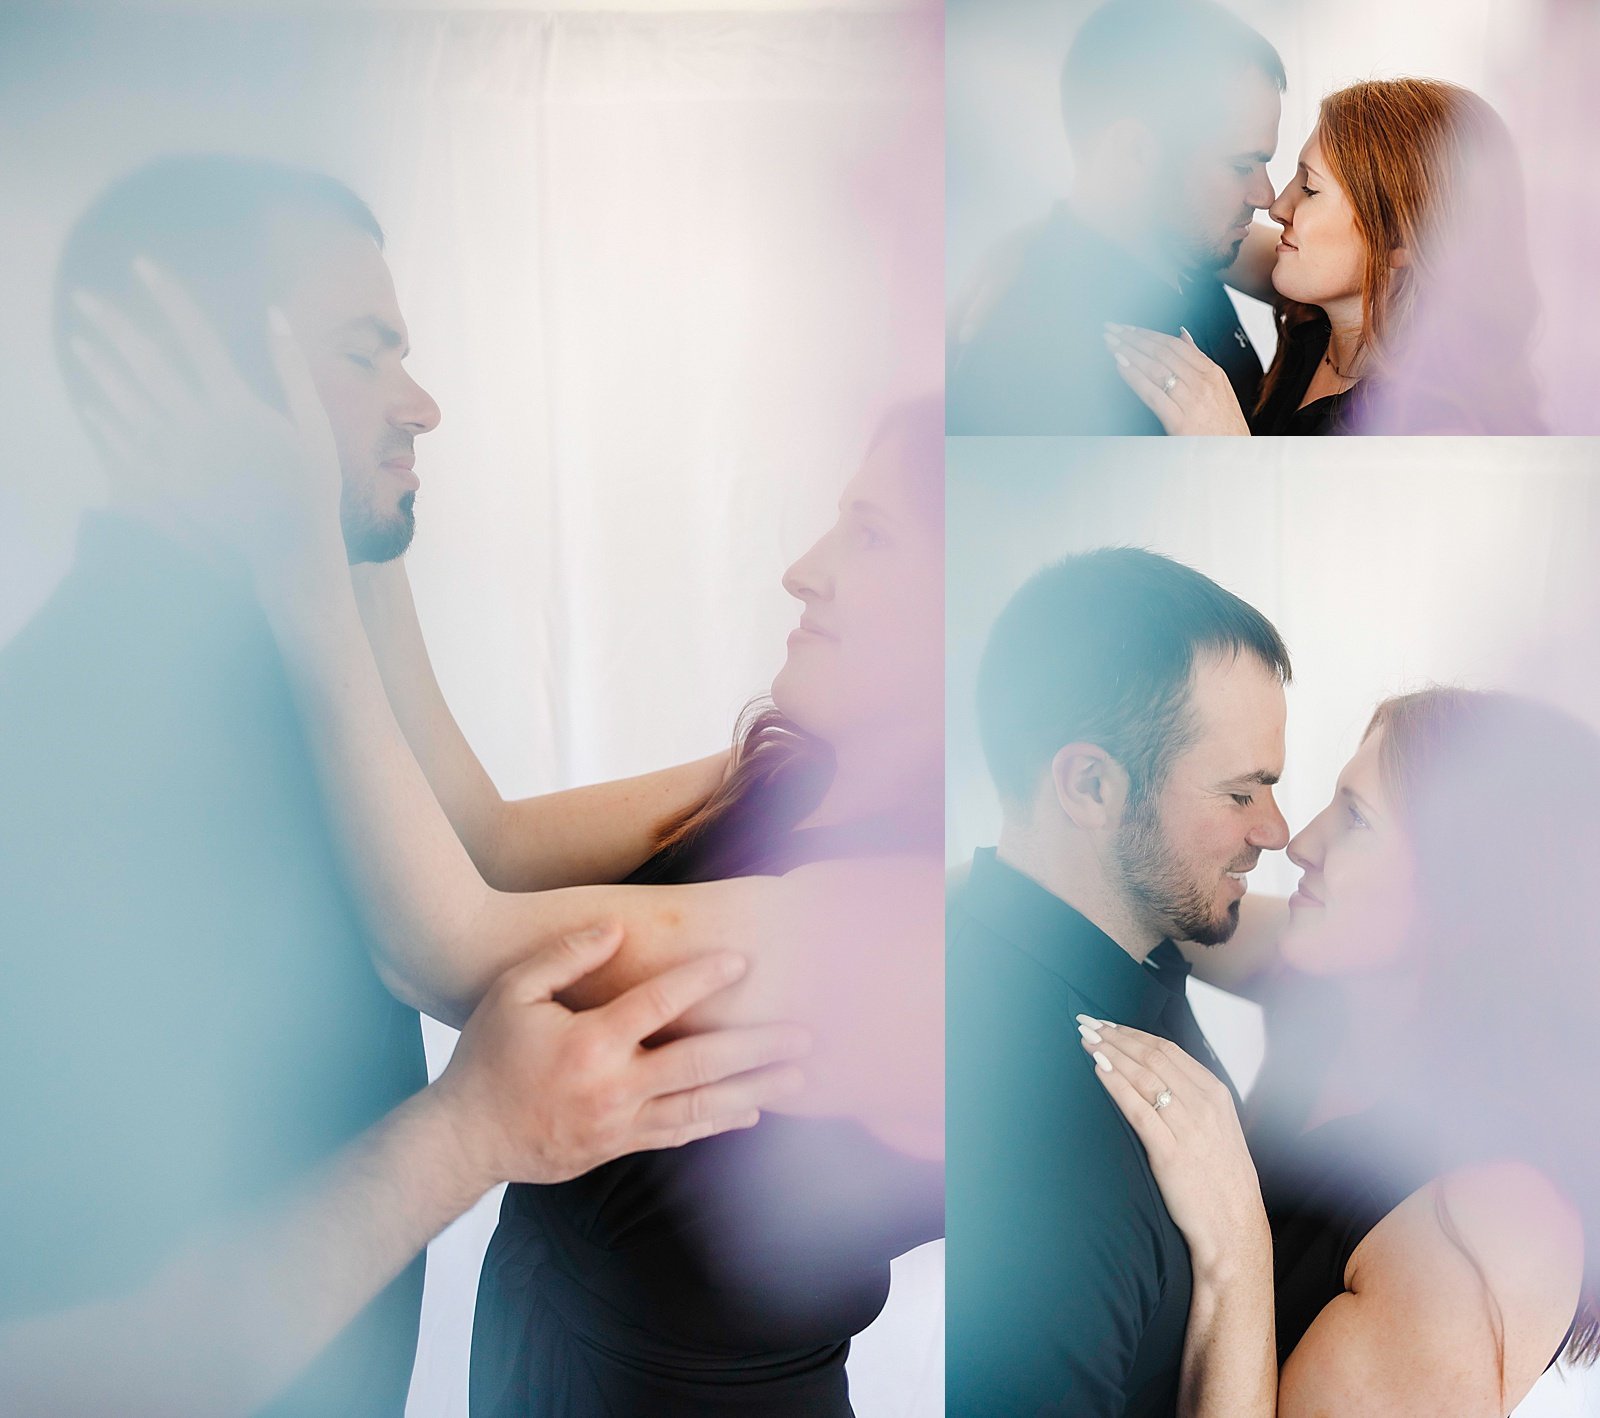  Couples having fun together in a photo studio with colors all around  